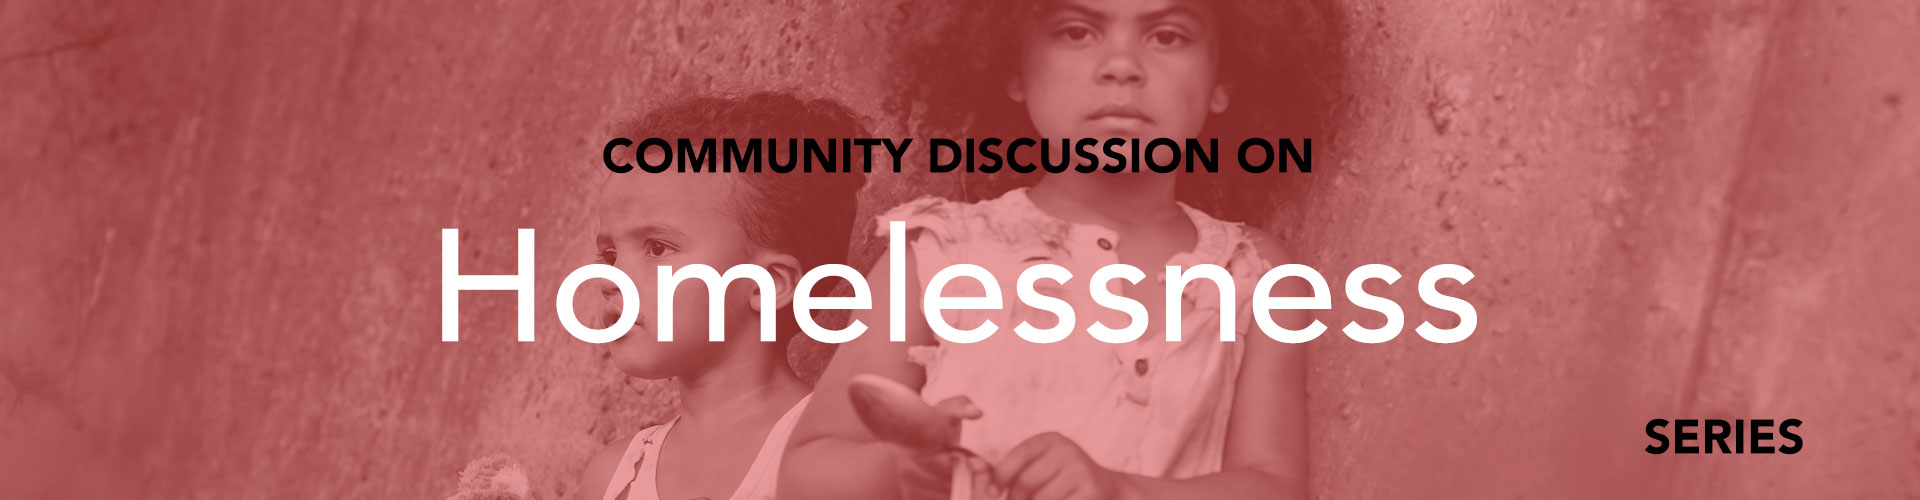 Homelessness in Overtown - the discussion series